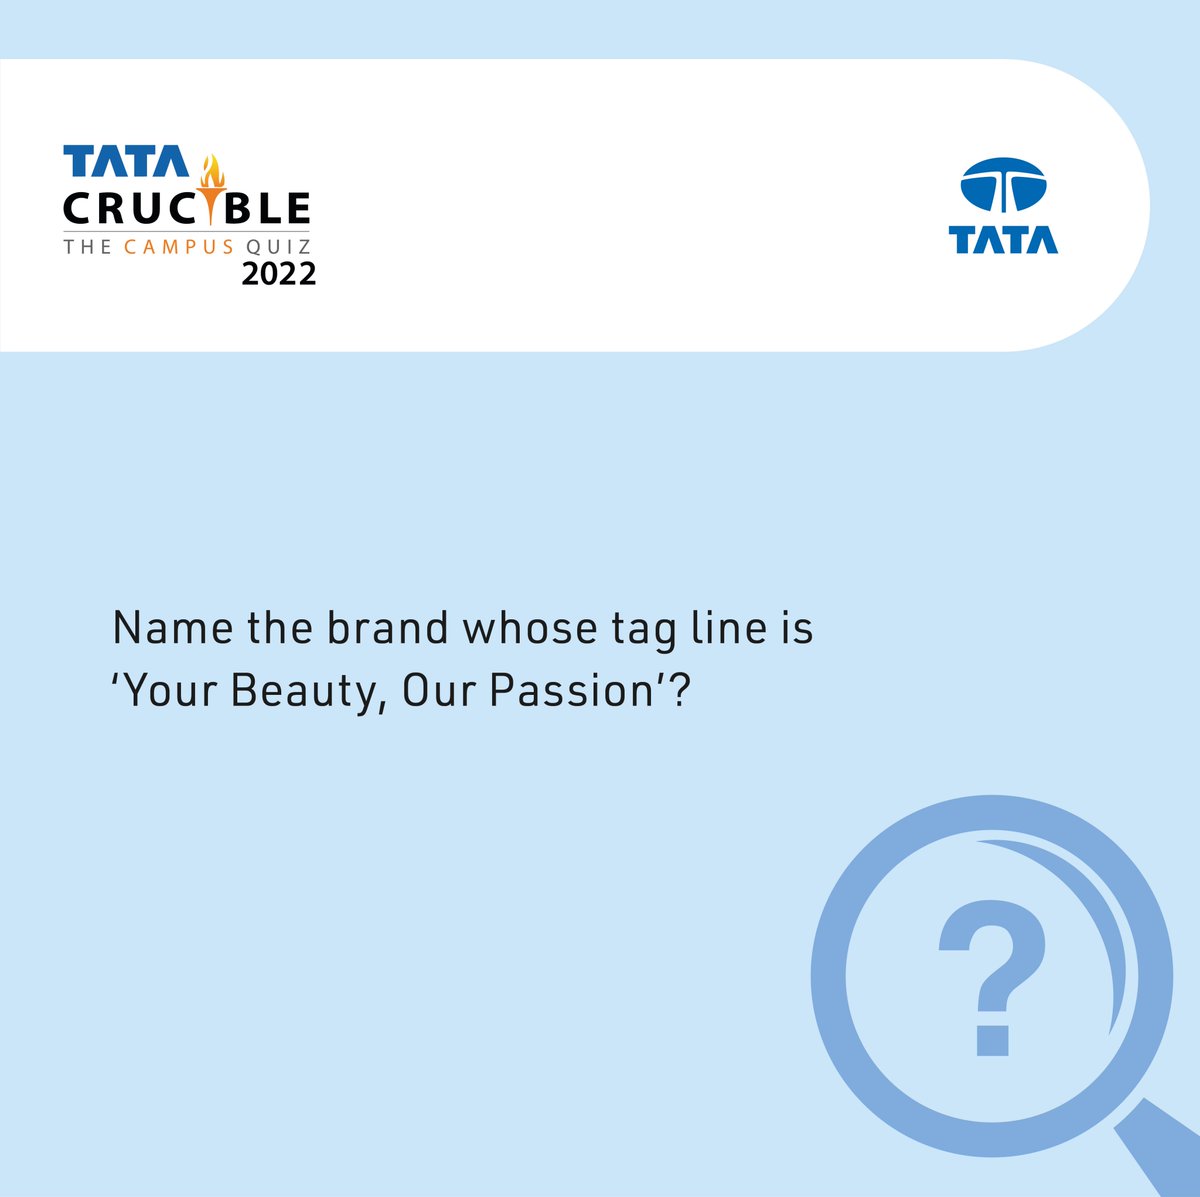 If you can guess the name of the brand, do share your answers in the comment section below! #TataCrucible #quiztime #gk #gkquiz #trivia #quizzes #facts #knowledge #generalknowledge #education #quizzing #dailyquiz #quizoftheday #quizmaster #questions #onlinequiz #quizcompetition